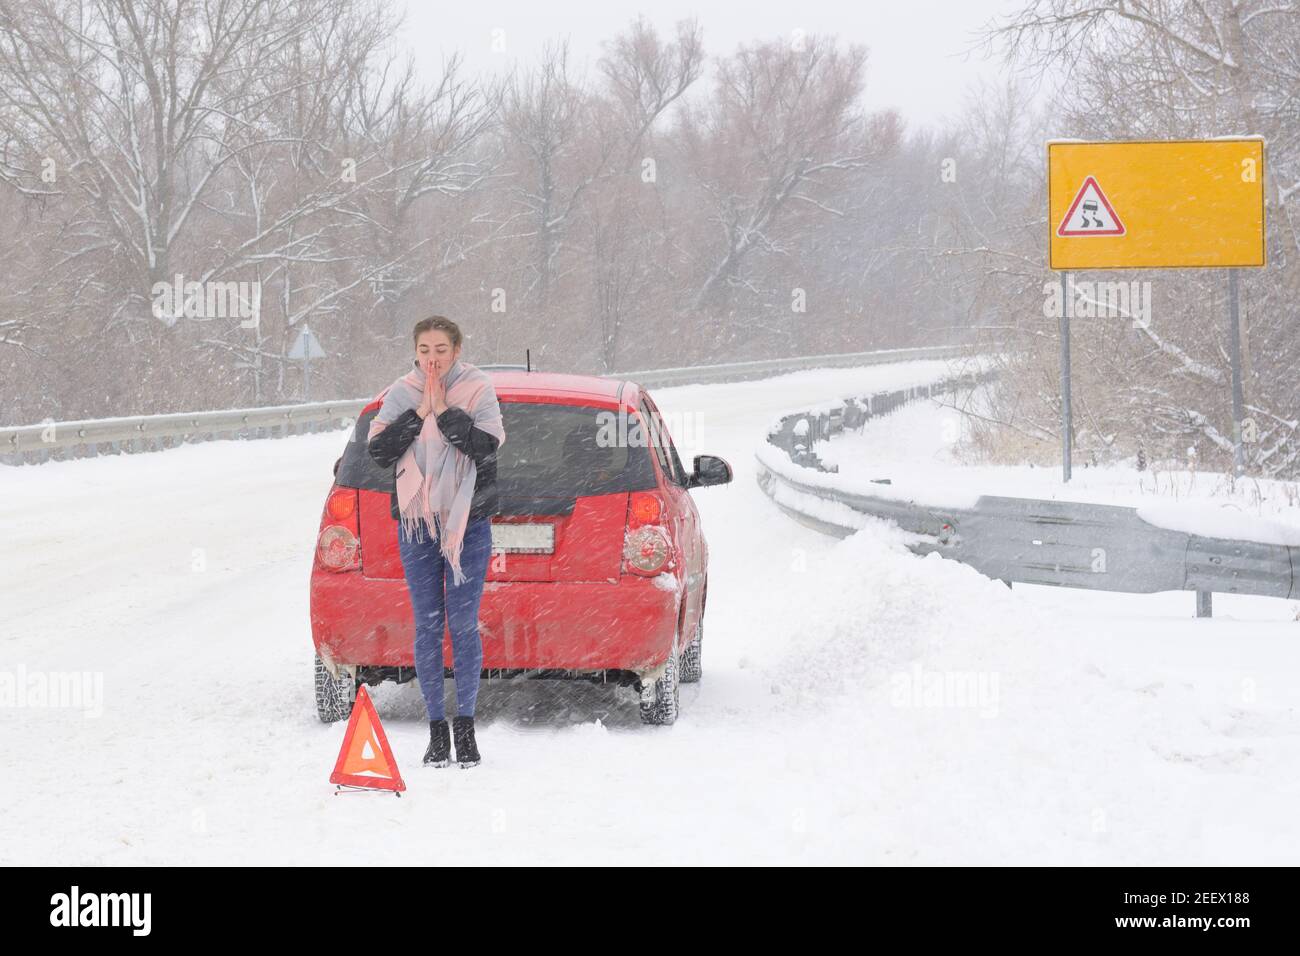 Confused woman driver near broken car on slippery road. Snow and blizzard, winter driving hazard. Stock Photo